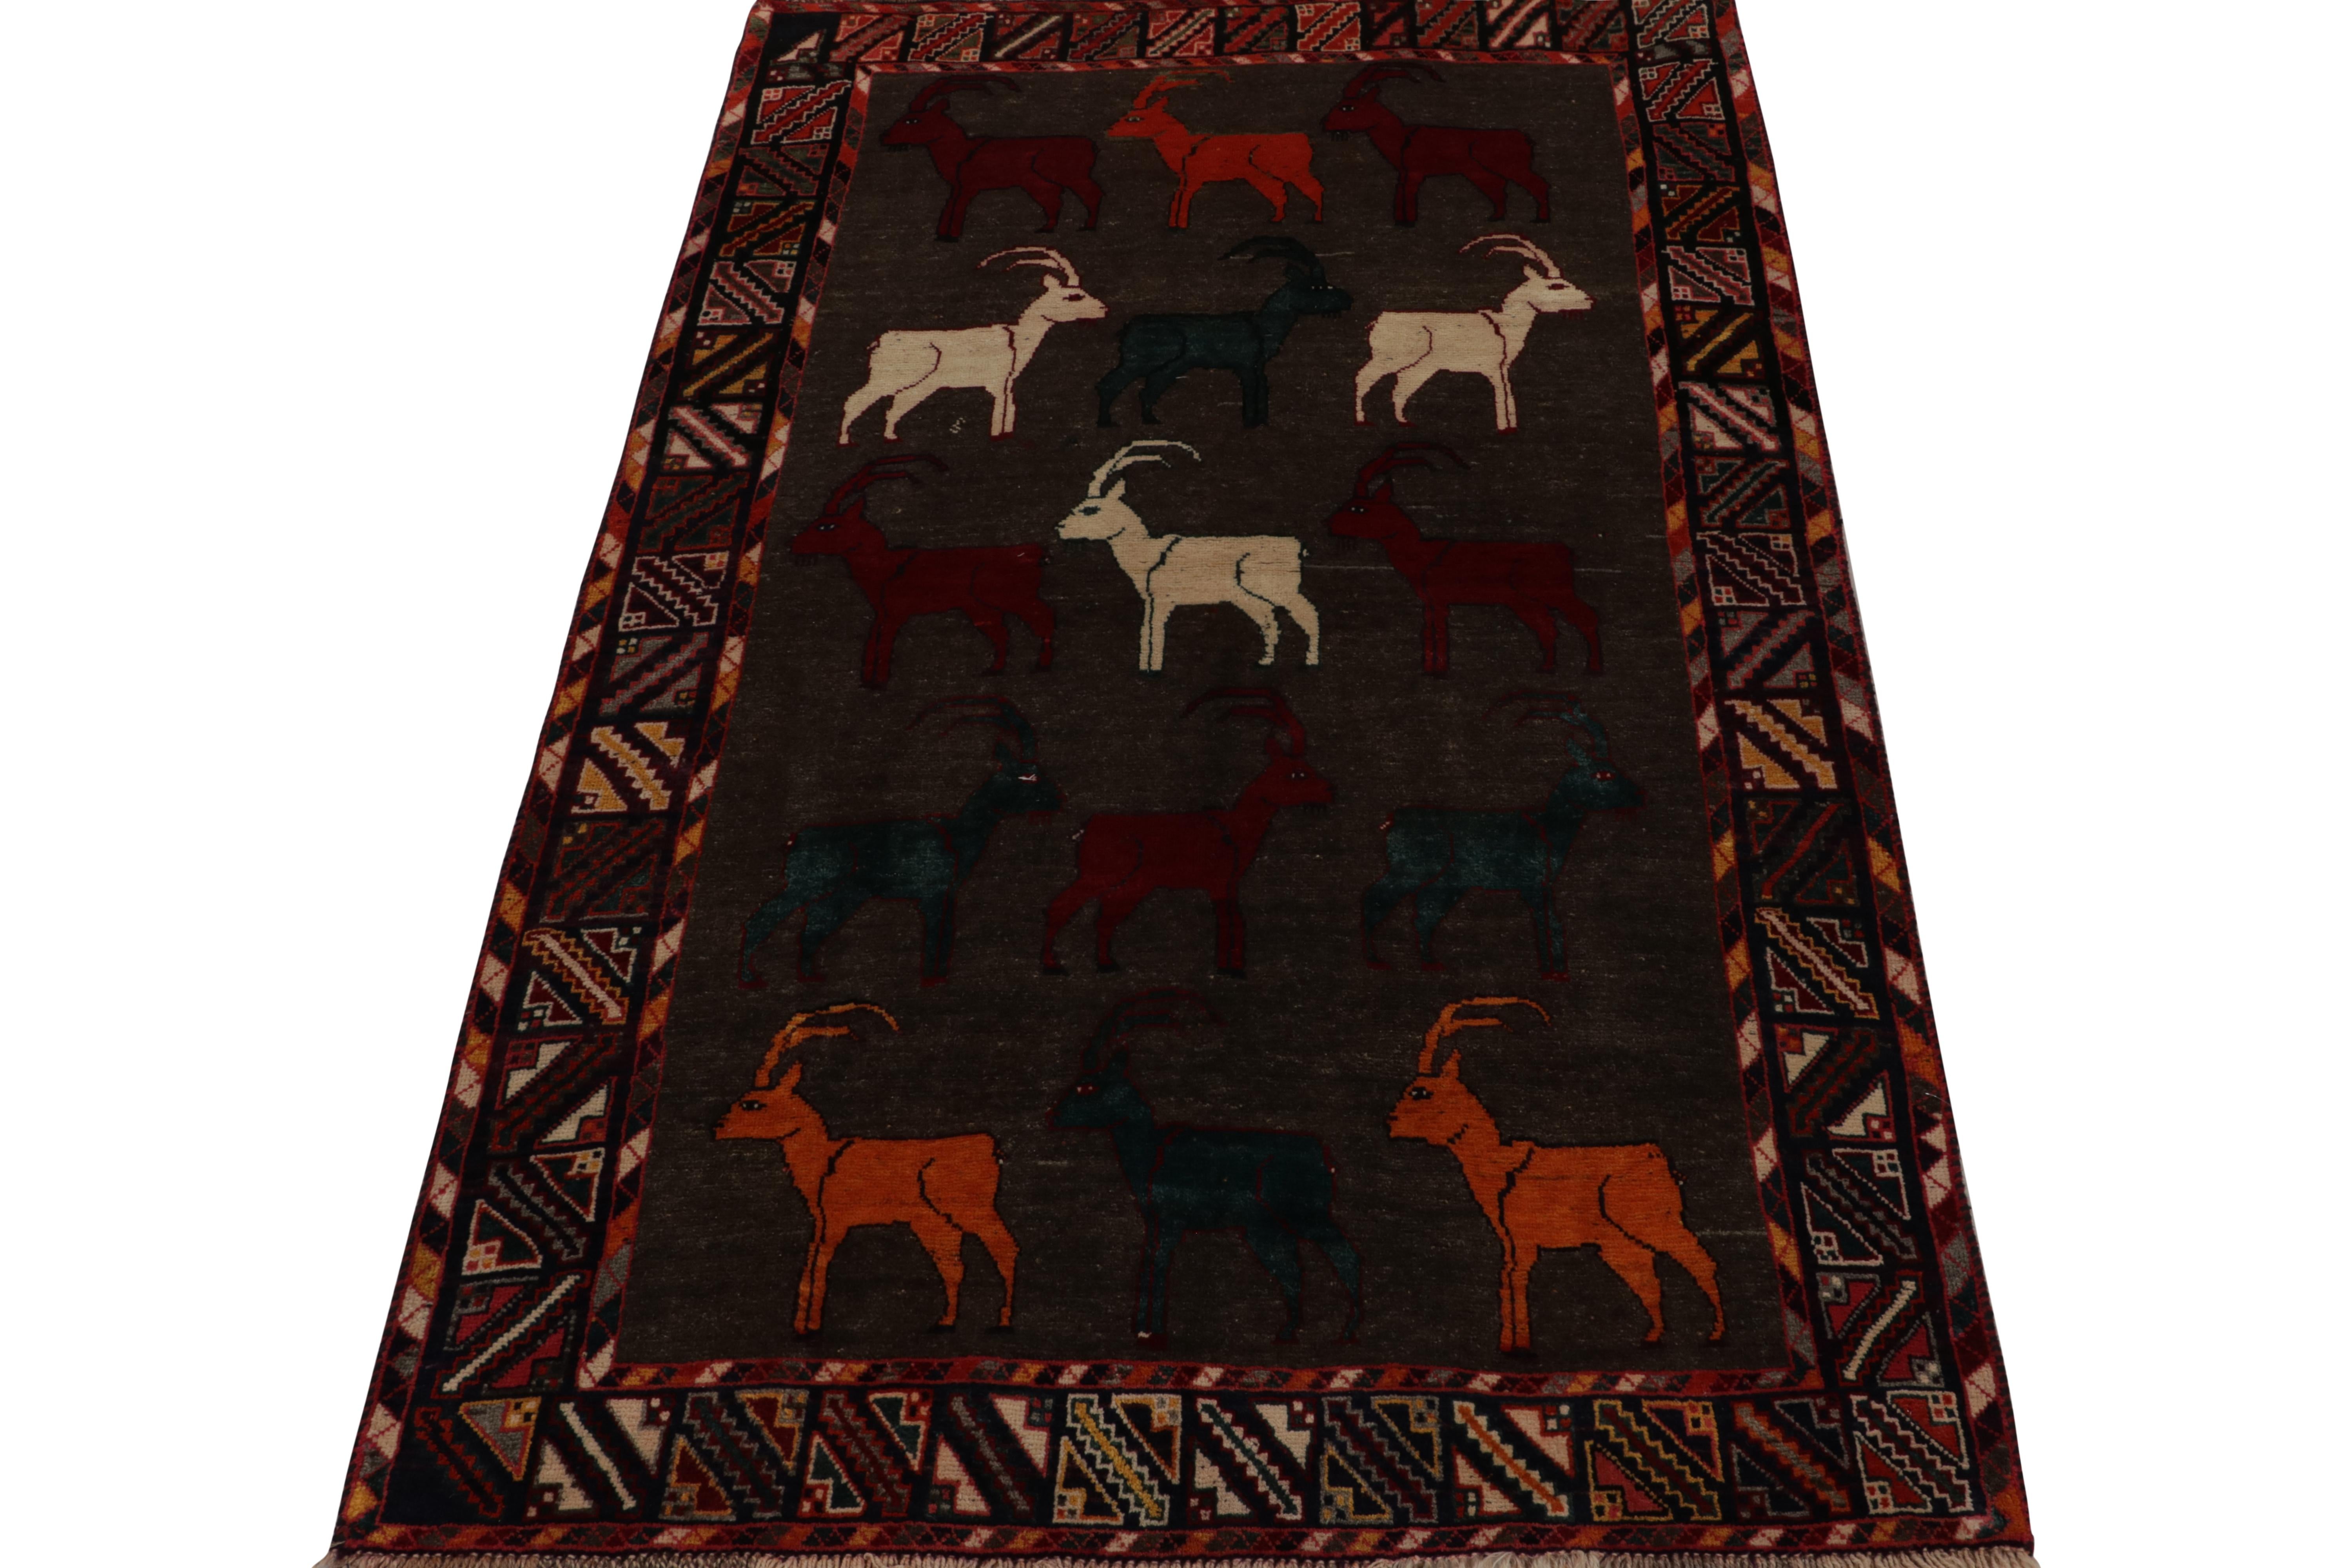 This vintage 5x8 Gabbeh Persian rug is from the latest entries in Rug & Kilim’s rare tribal curations. Hand-knotted in wool circa 1950-1960.

On the Design:

This tribal provenance is one of the most primitive, and collectible shabby-chic styles